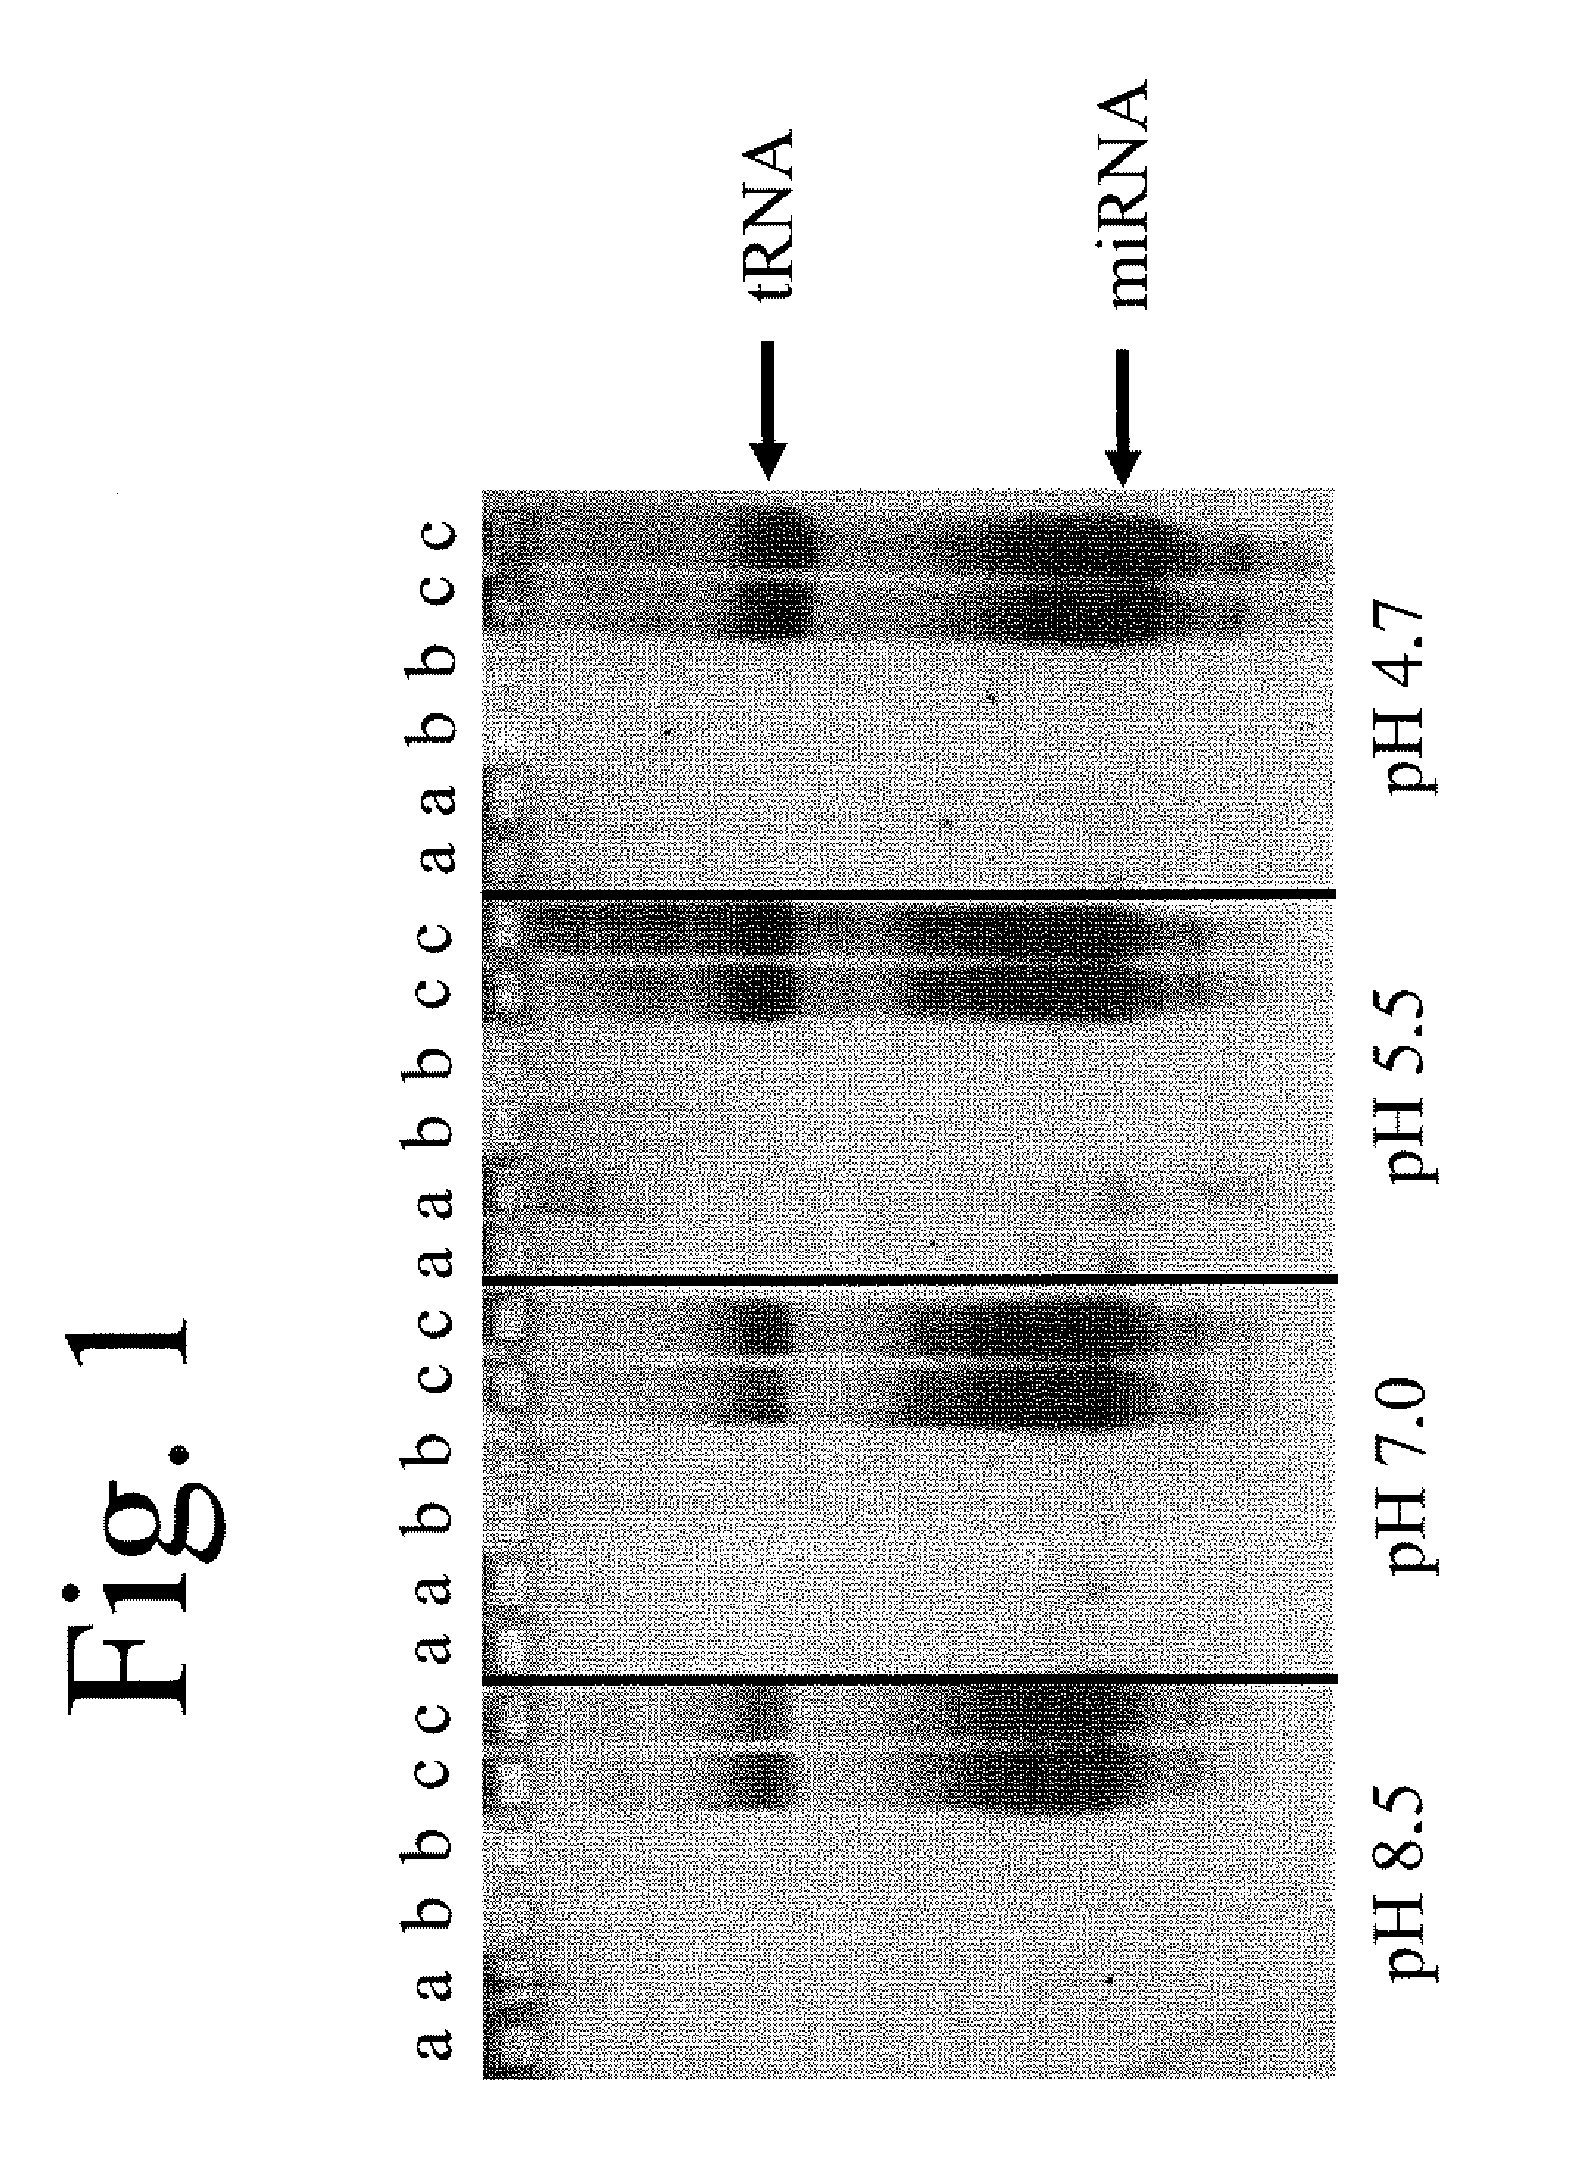 Method for enriching short-chain nucleic acids